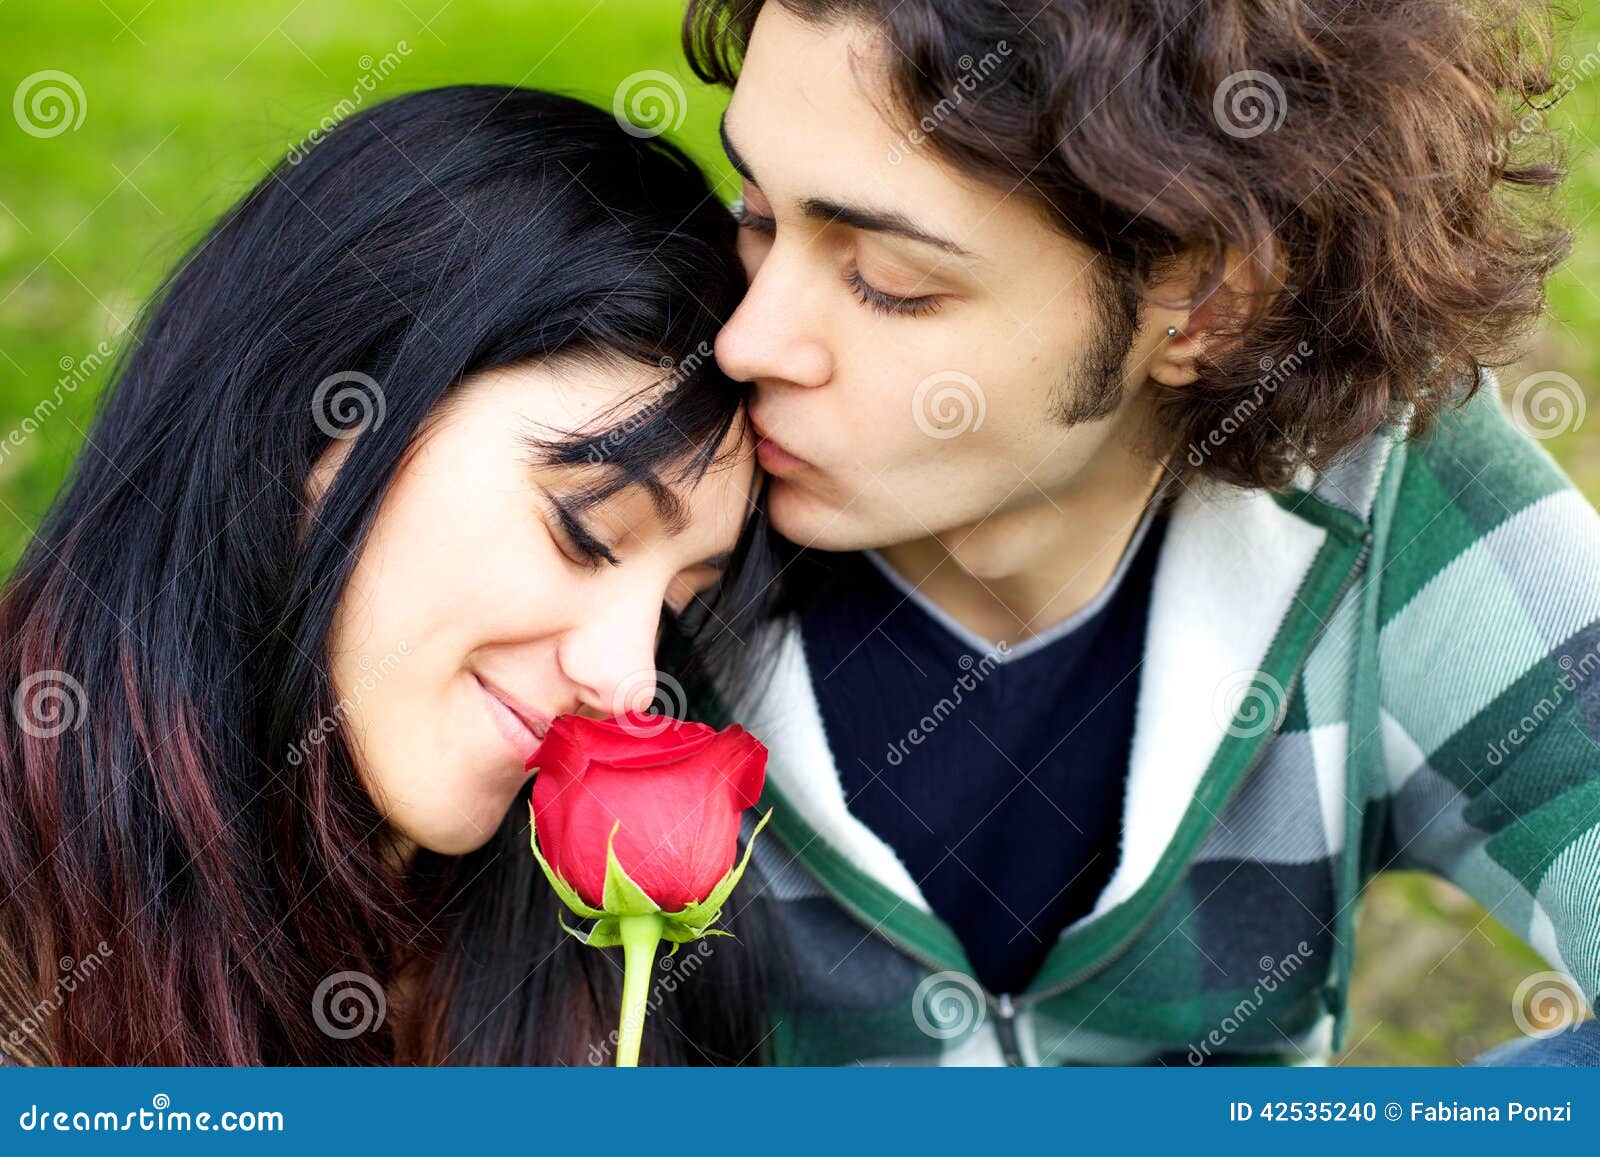 Cute Young Couple In Love With Red Ros Stock Photo - Image ...